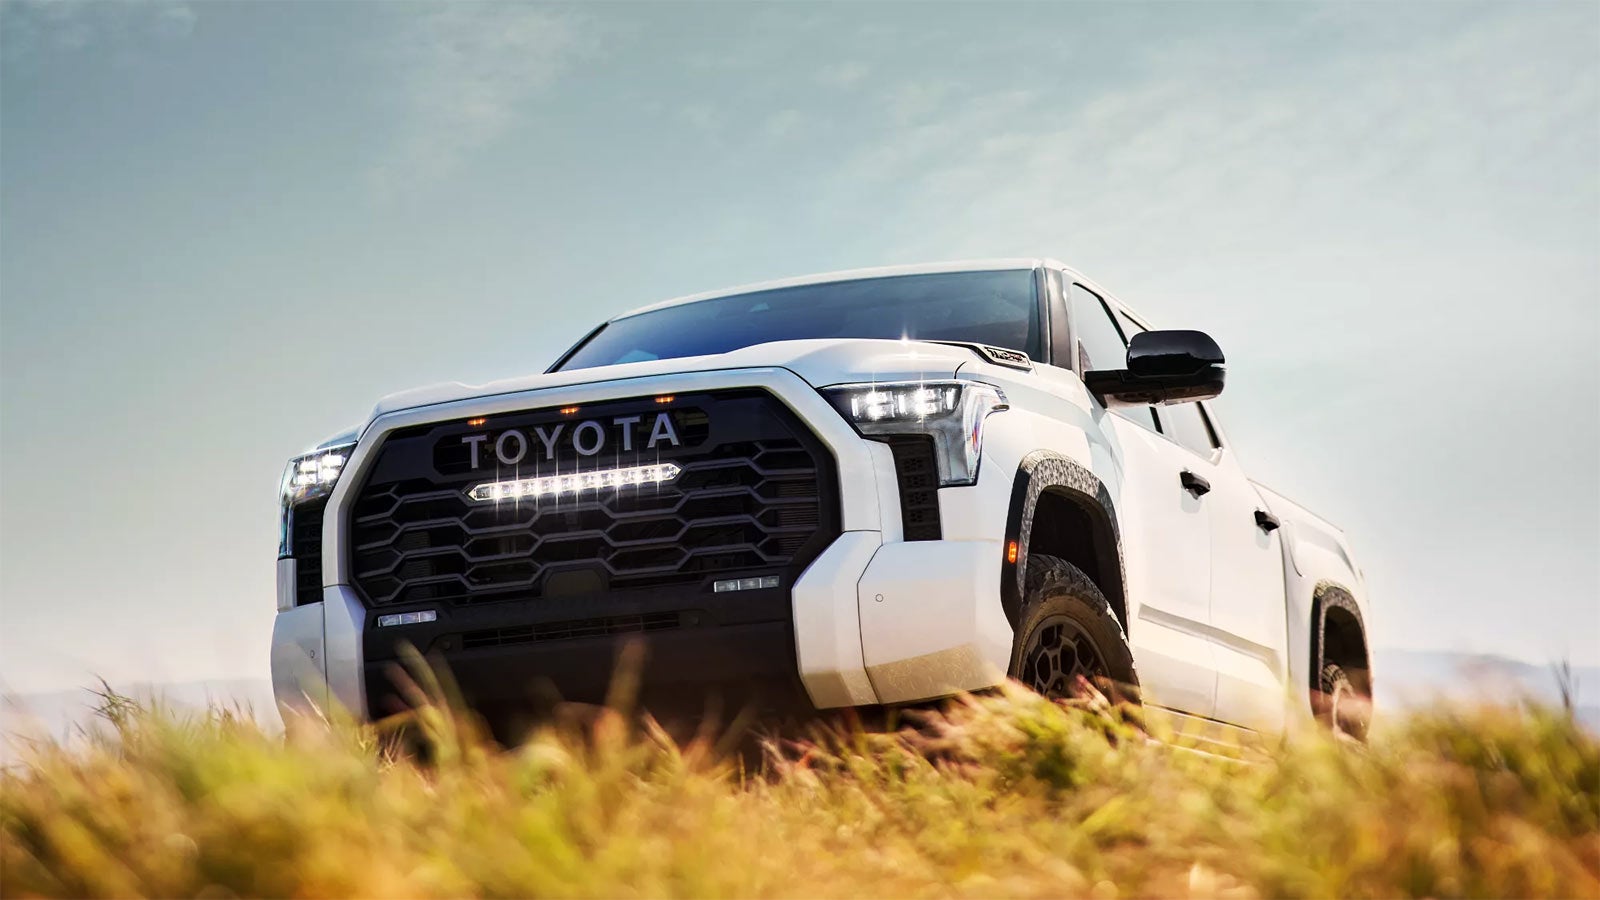 2022 Toyota Tundra Gallery | Thornhill Toyota in Chapmanville WV